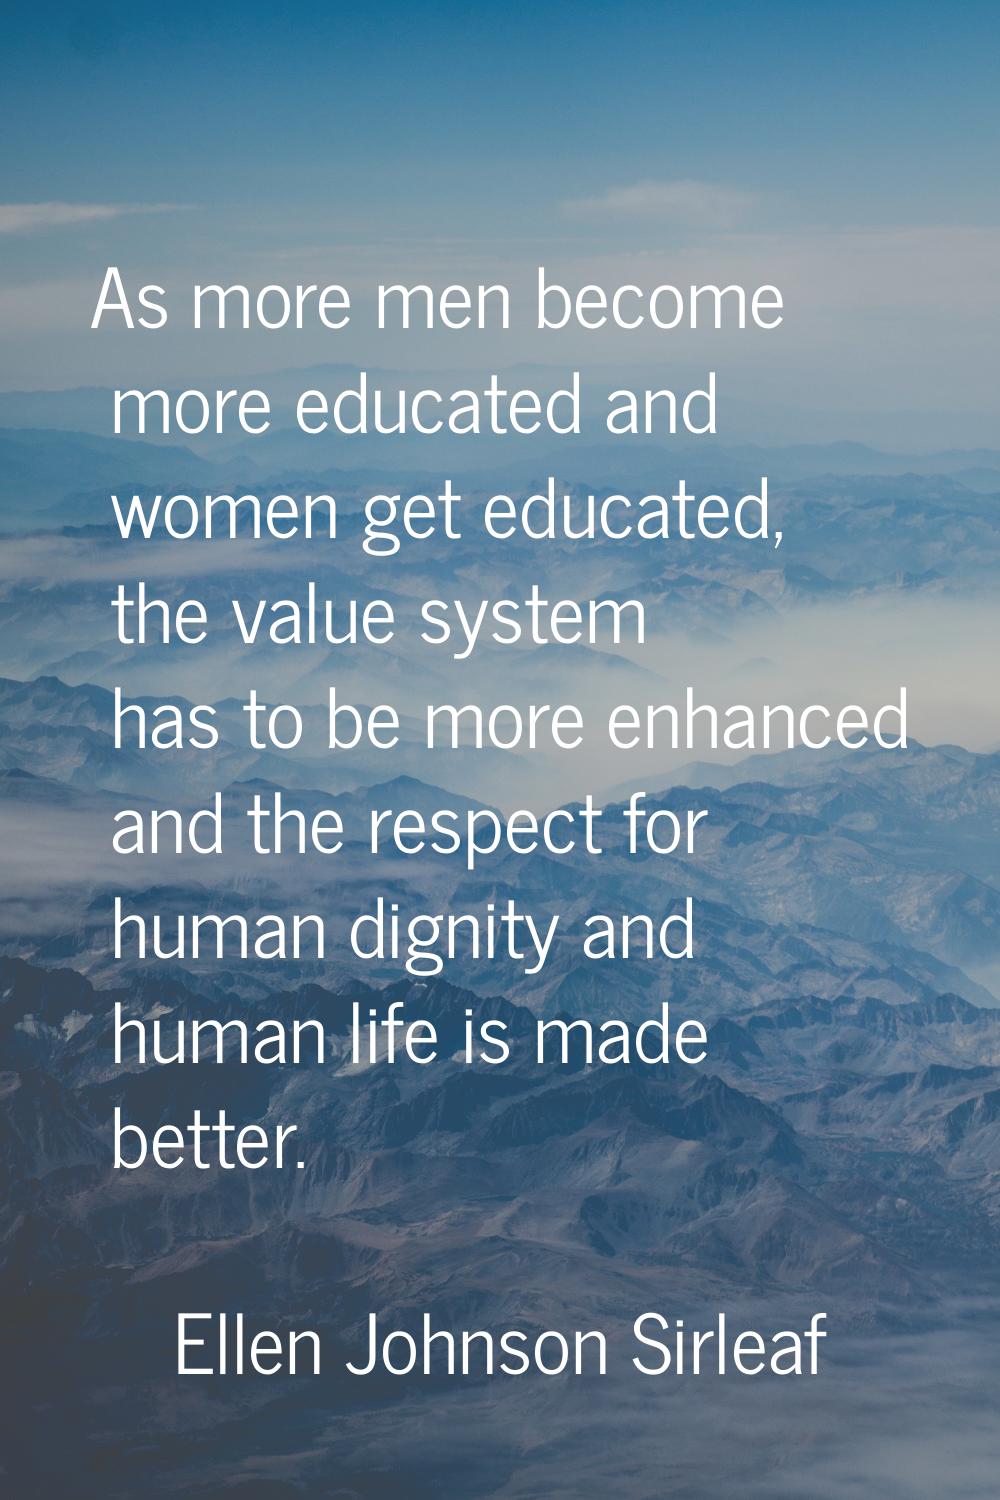 As more men become more educated and women get educated, the value system has to be more enhanced a